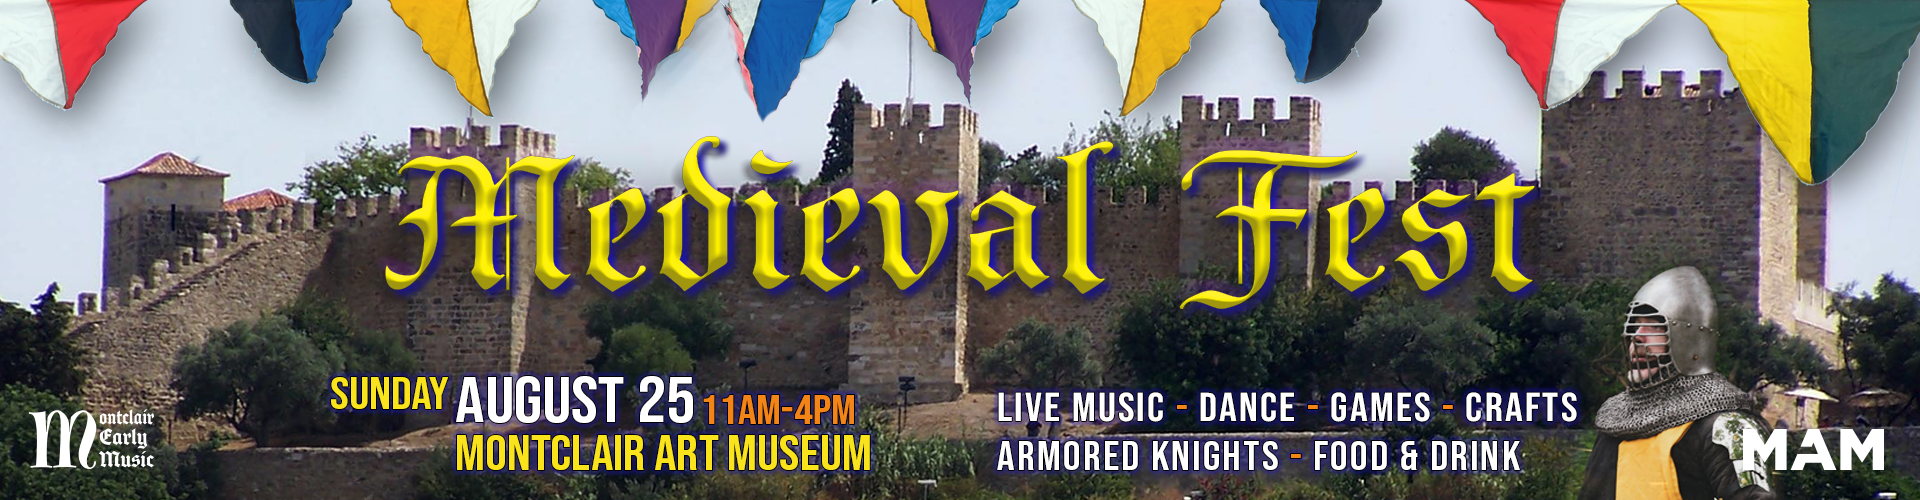 MedievalFest Graphic Banner with castle and knight